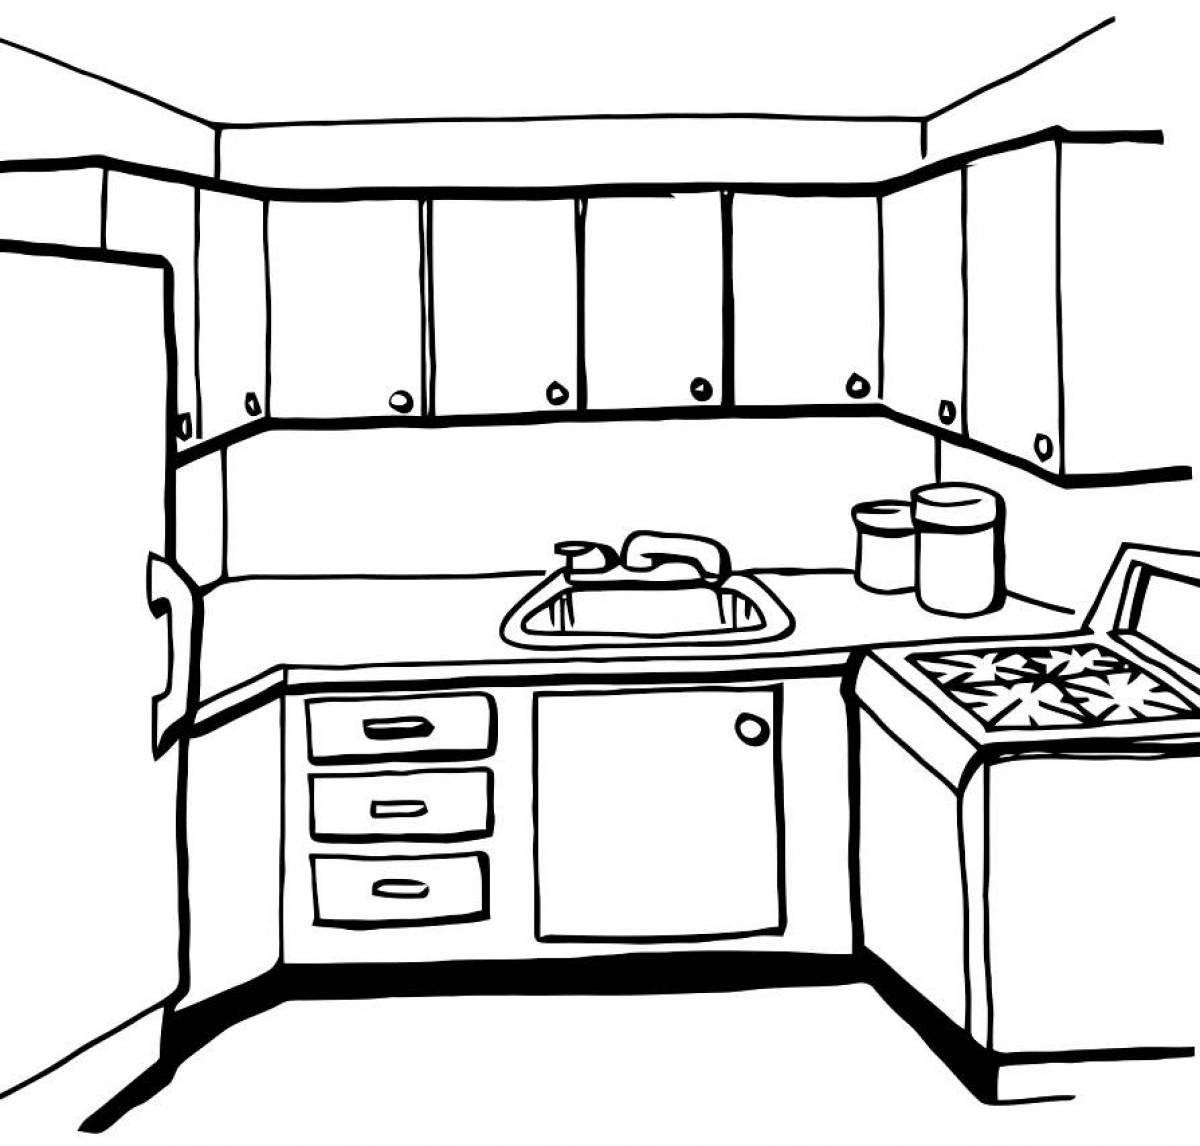 Incredible kitchen coloring book for kids